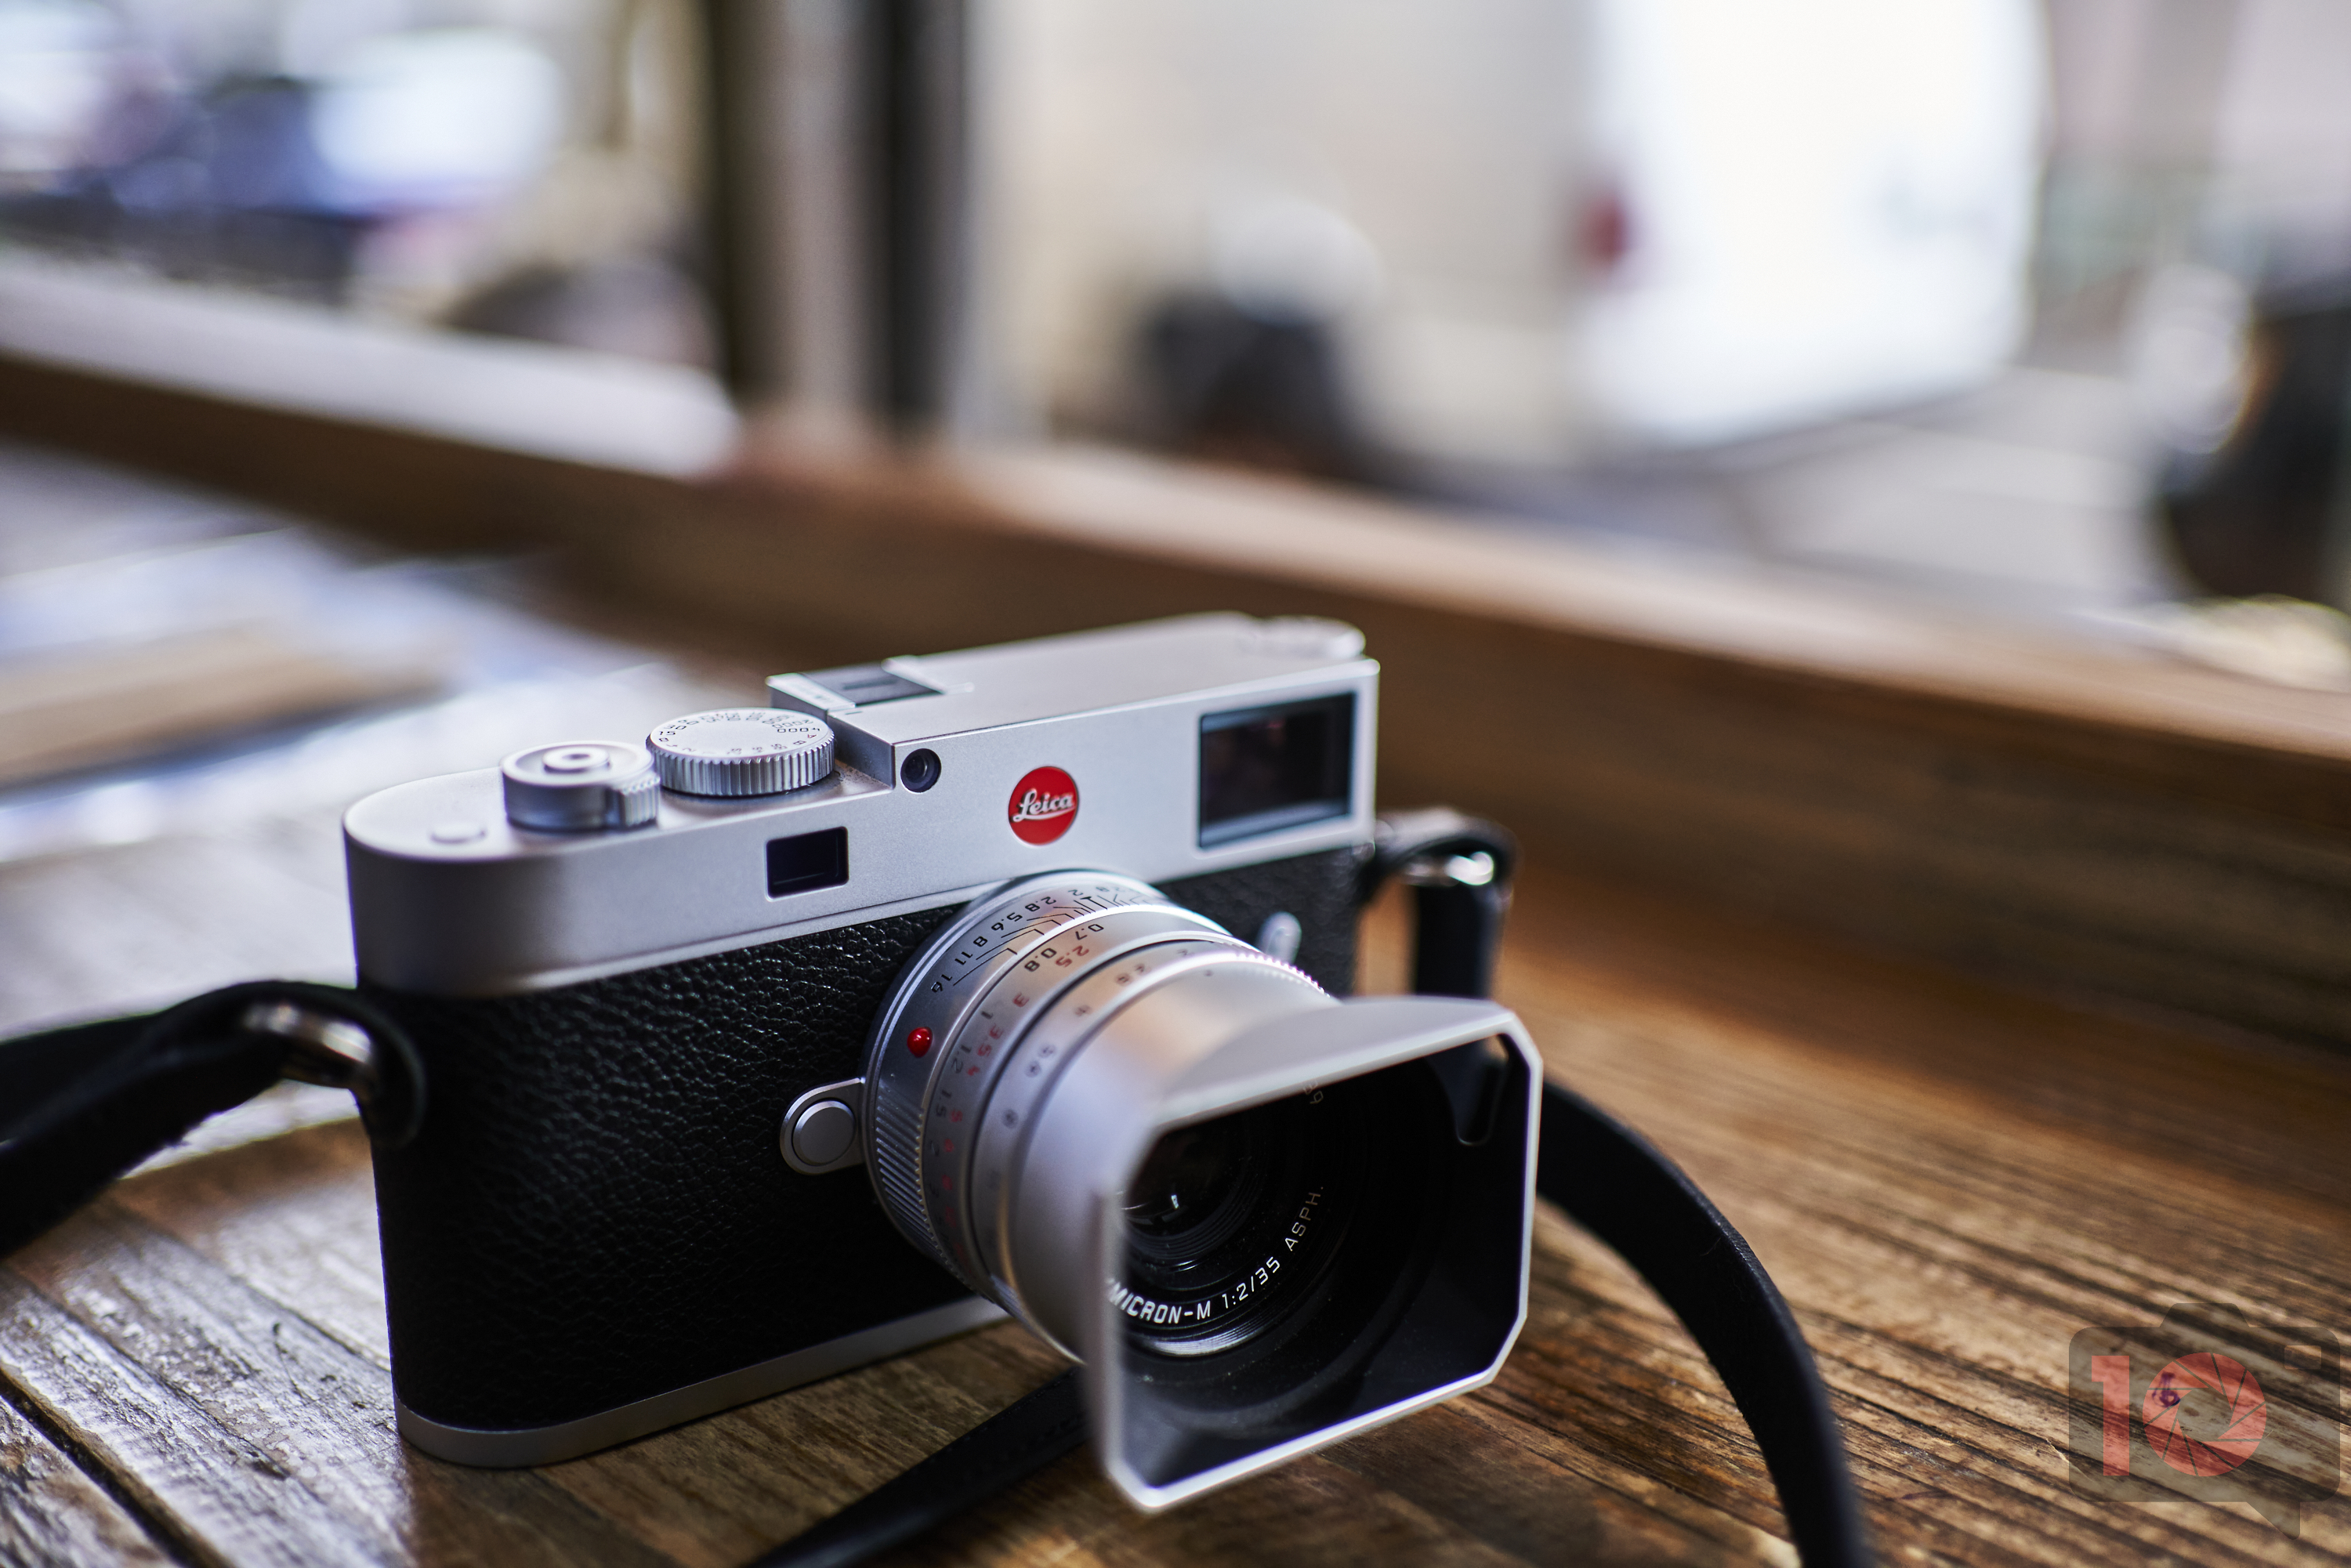 Chris Gampat The Phoblographer Leica M11 review images product photos 1.81-250s400